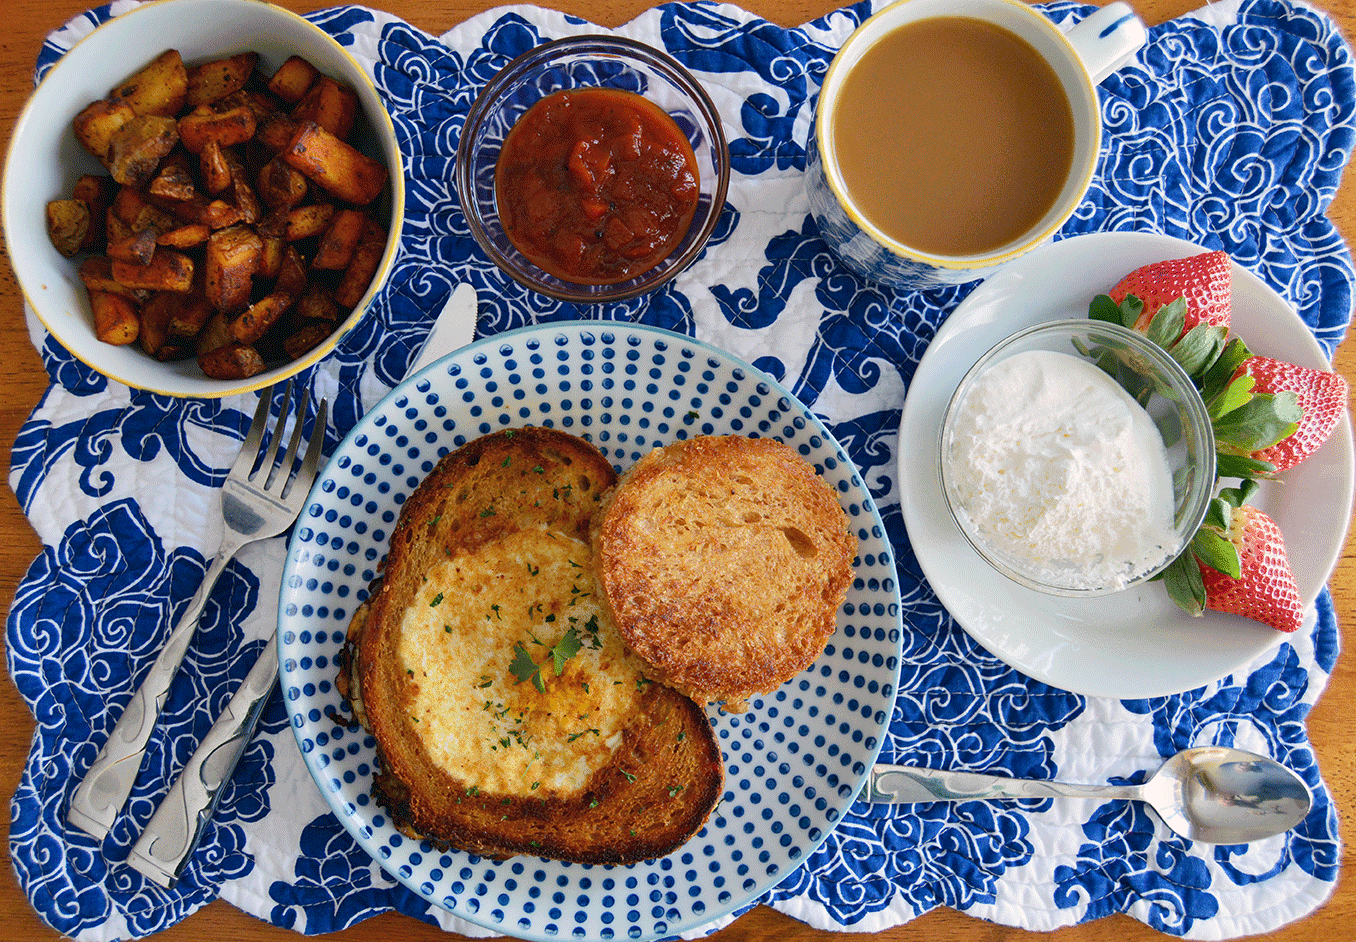 fully breakfast with paprika potatoes as a side